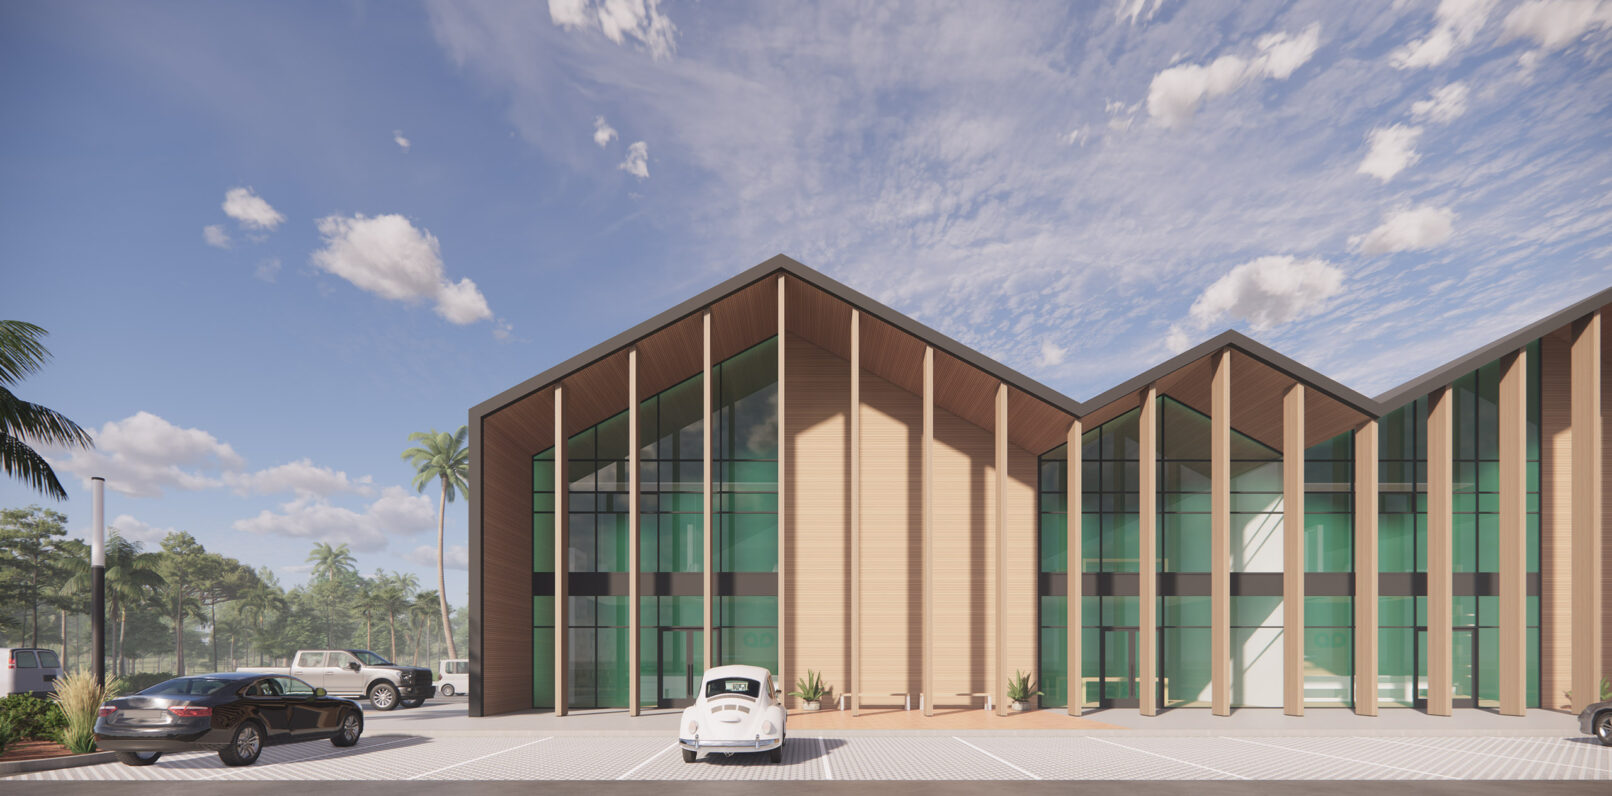 Beautiful front view of modern mixed-use building in Melbourne, Florida designed by architects BROSROMANBRAUN.